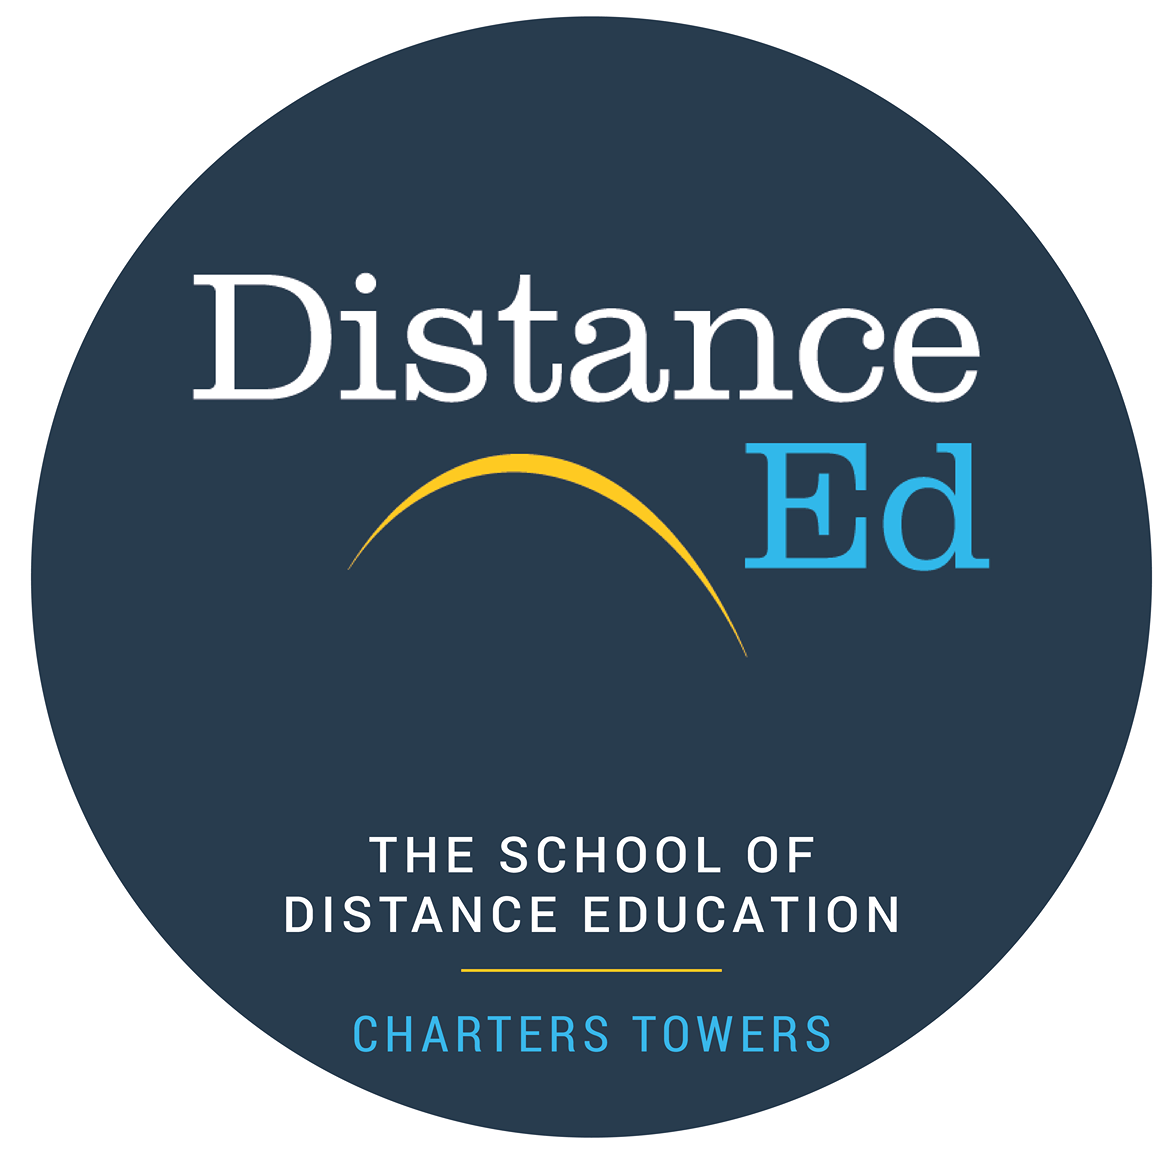 Distance Education, Charters Towers